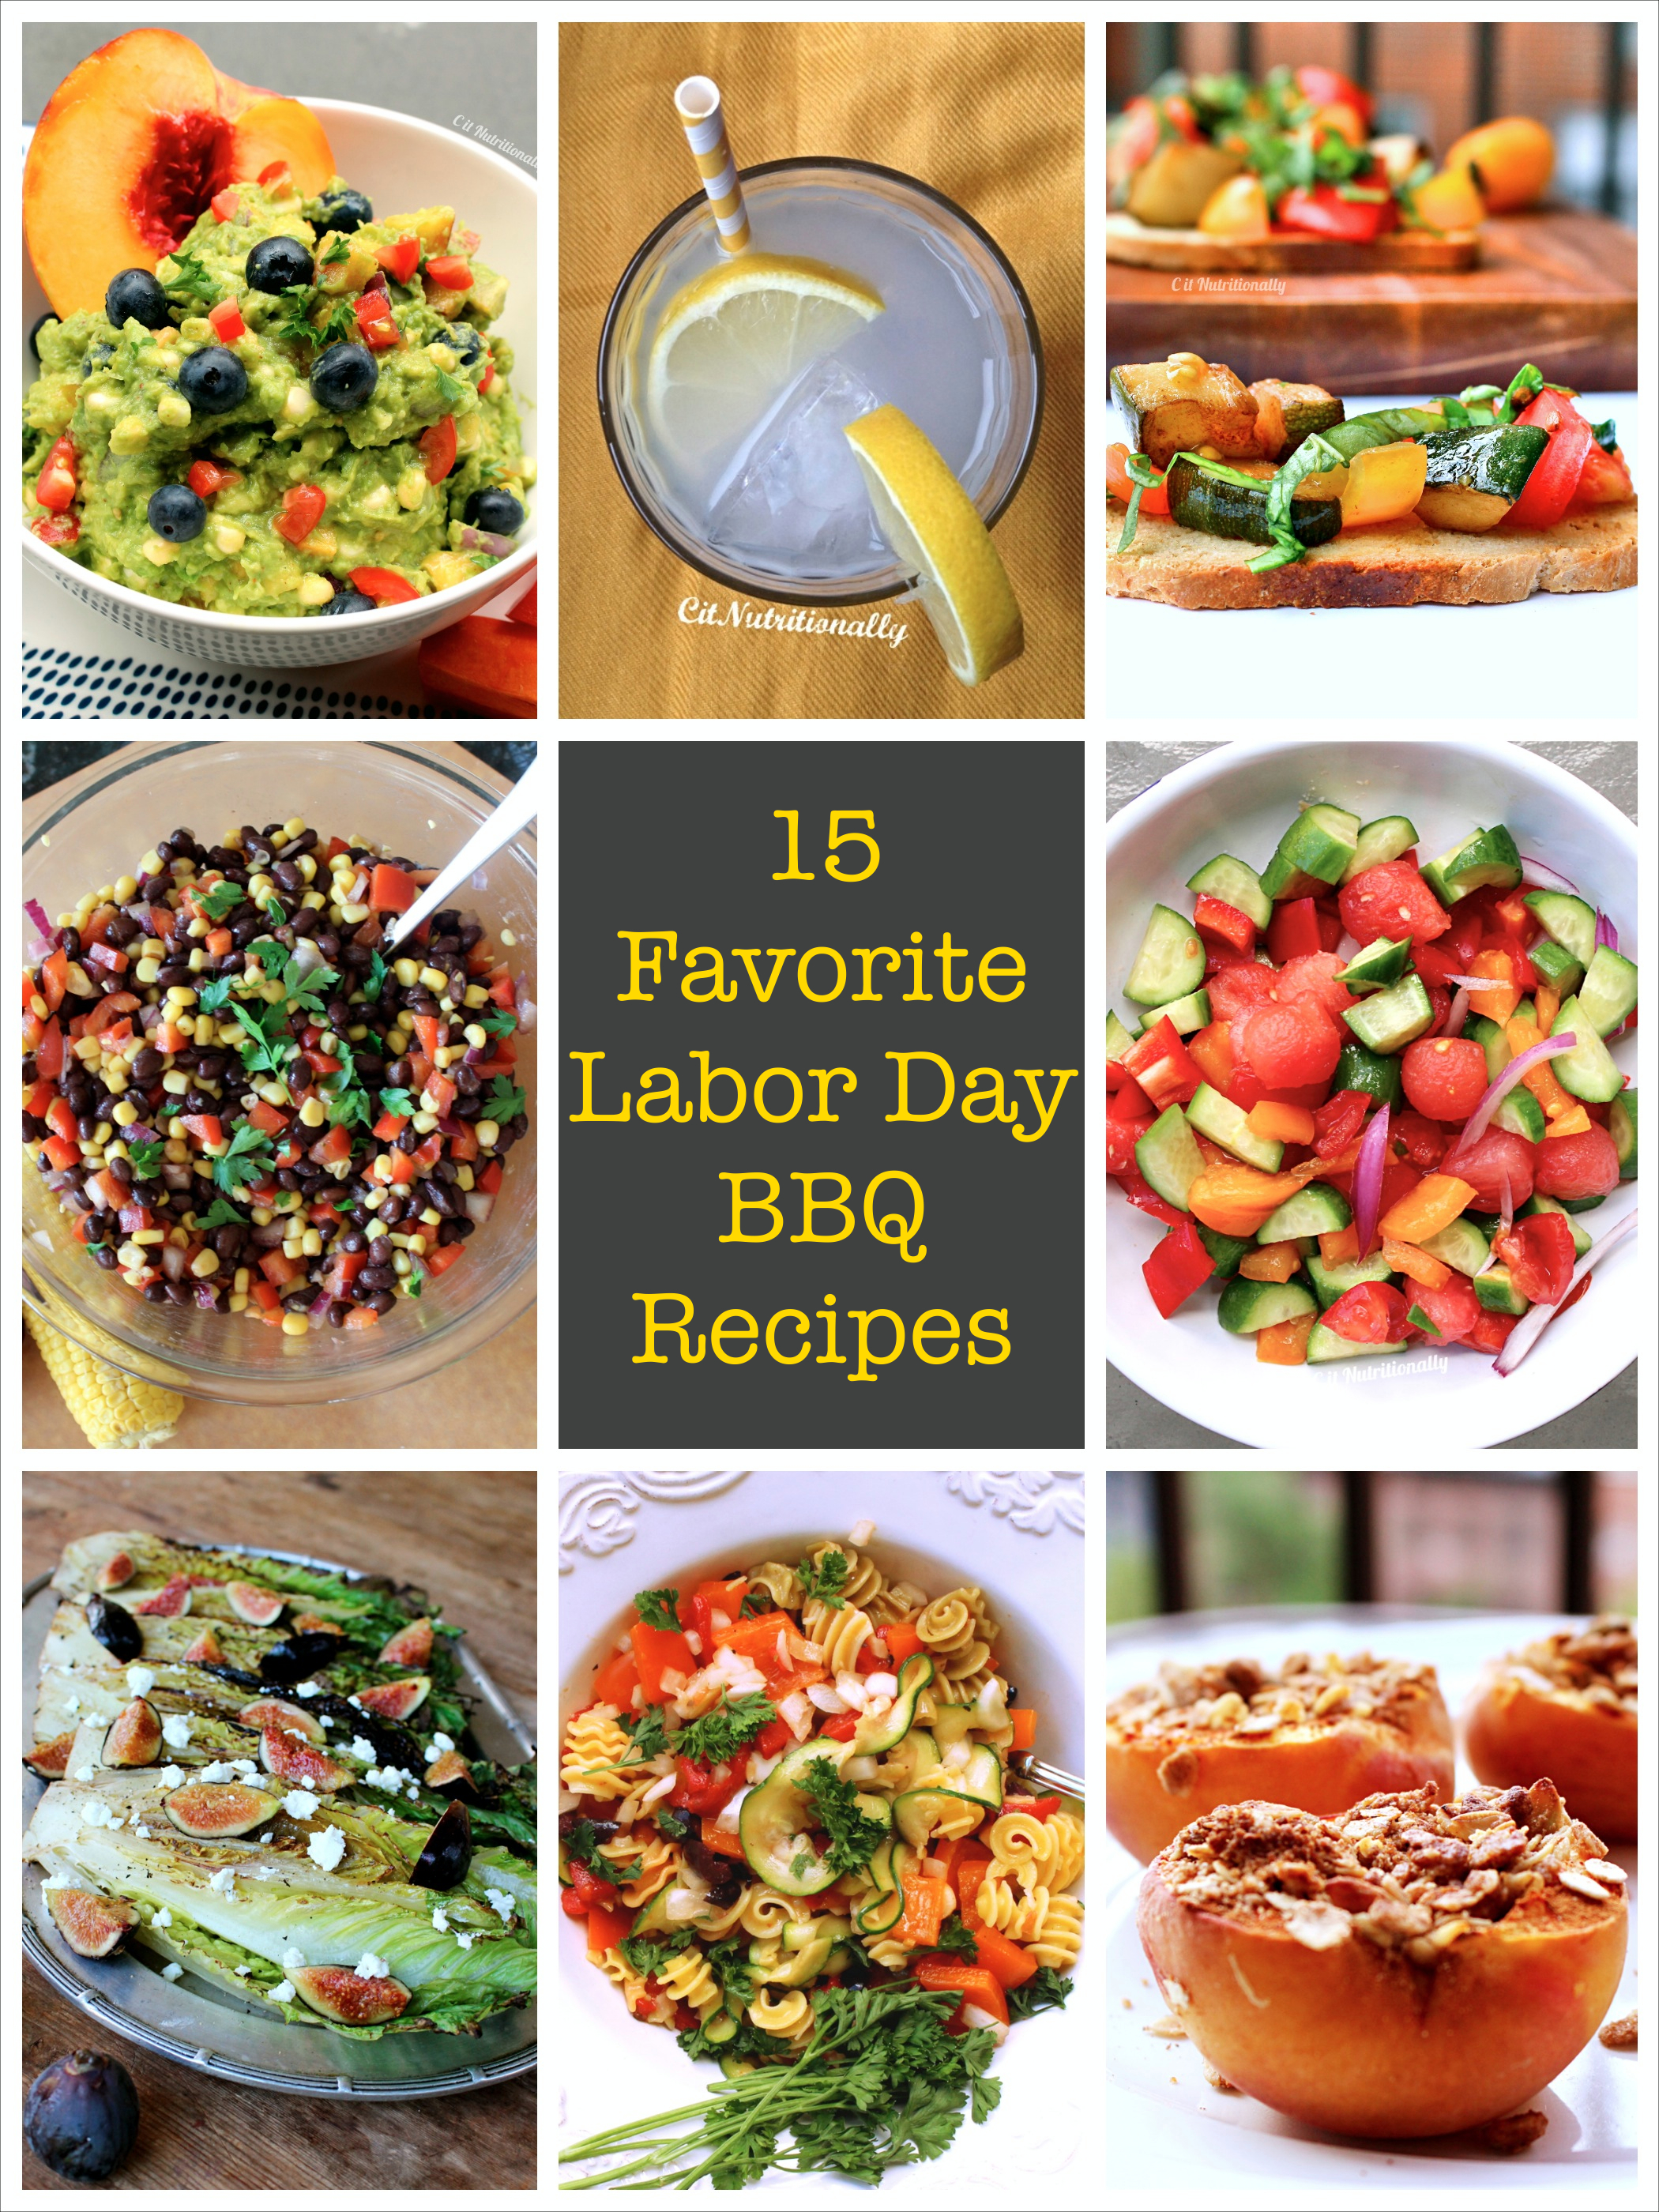 http://chelseyamernutrition.com/wp-content/uploads/2014/08/Labor-Day-BBQ-recipes-collage-labeled.jpg